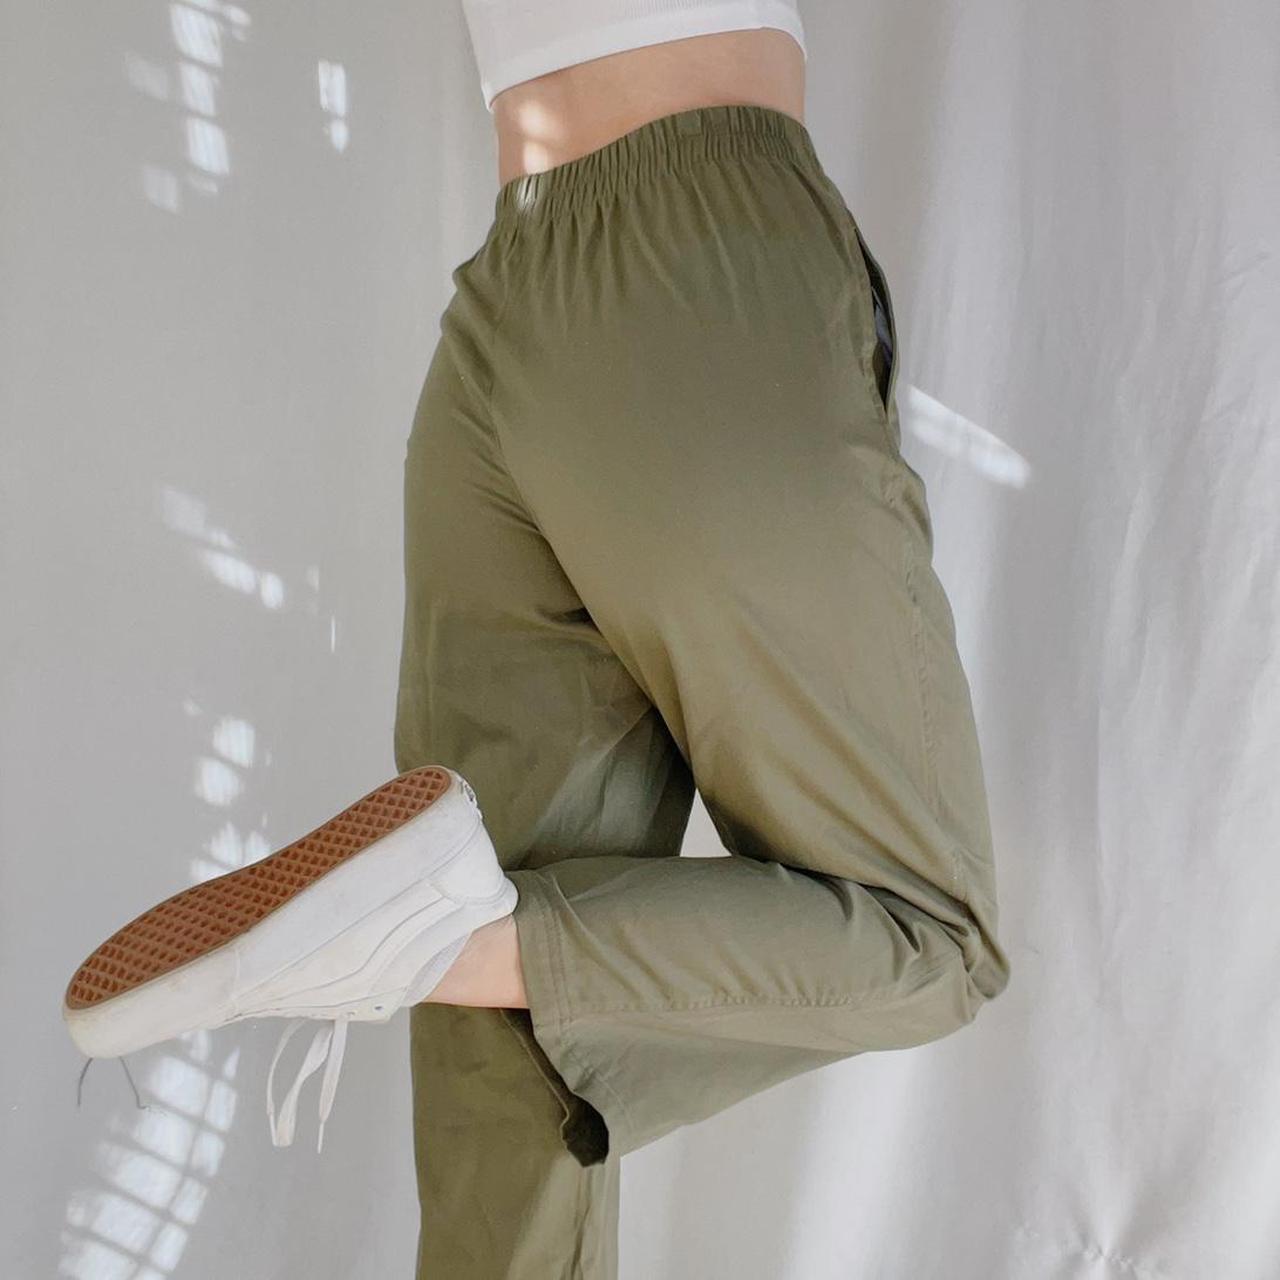 Product Image 2 - Vintage Green Straight Pants

Next Day